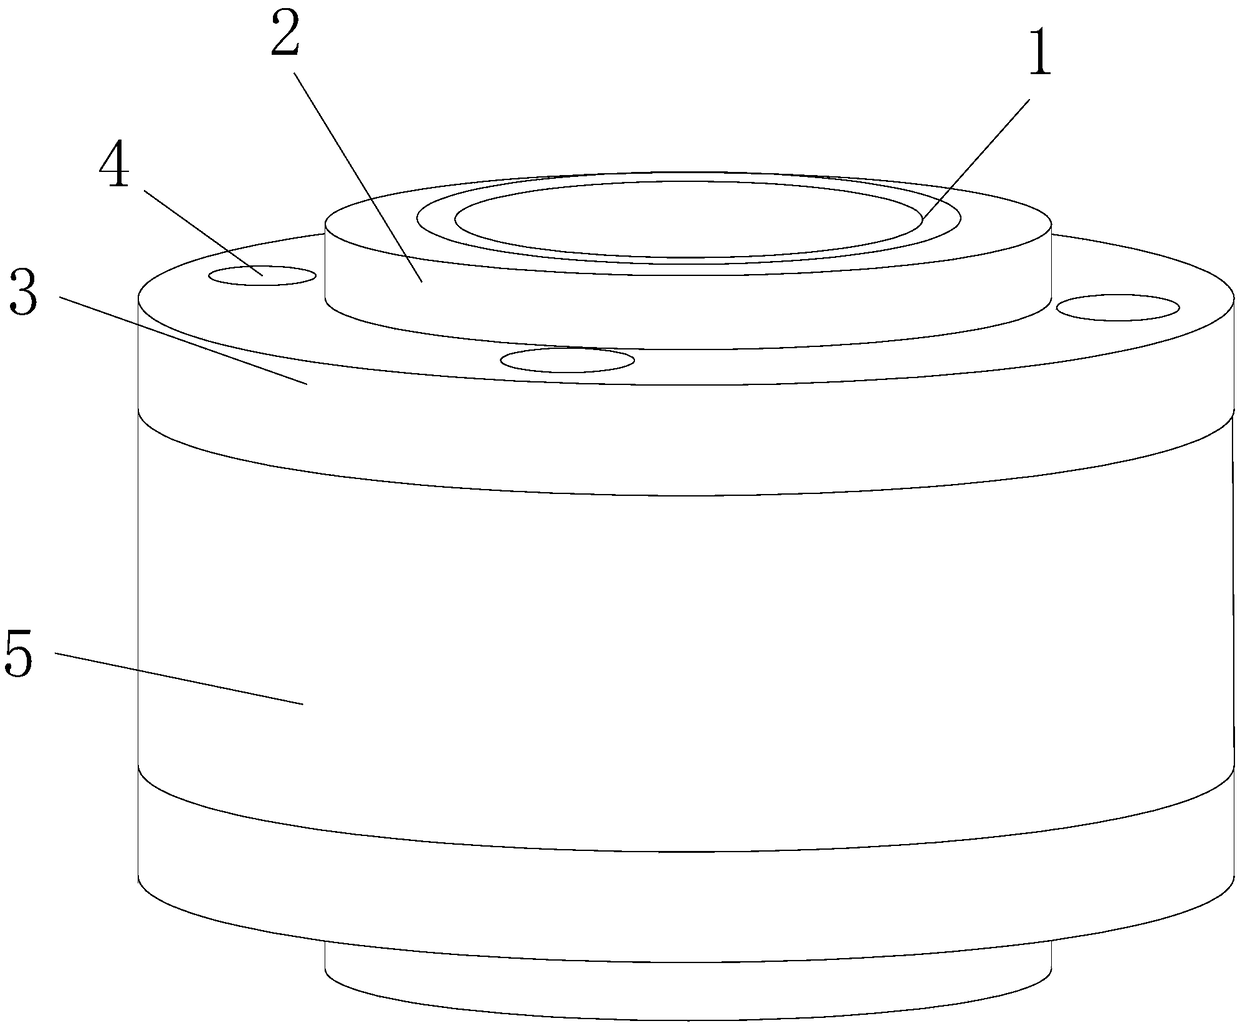 Pressure-relief clean water connection flange of seawater desalting device